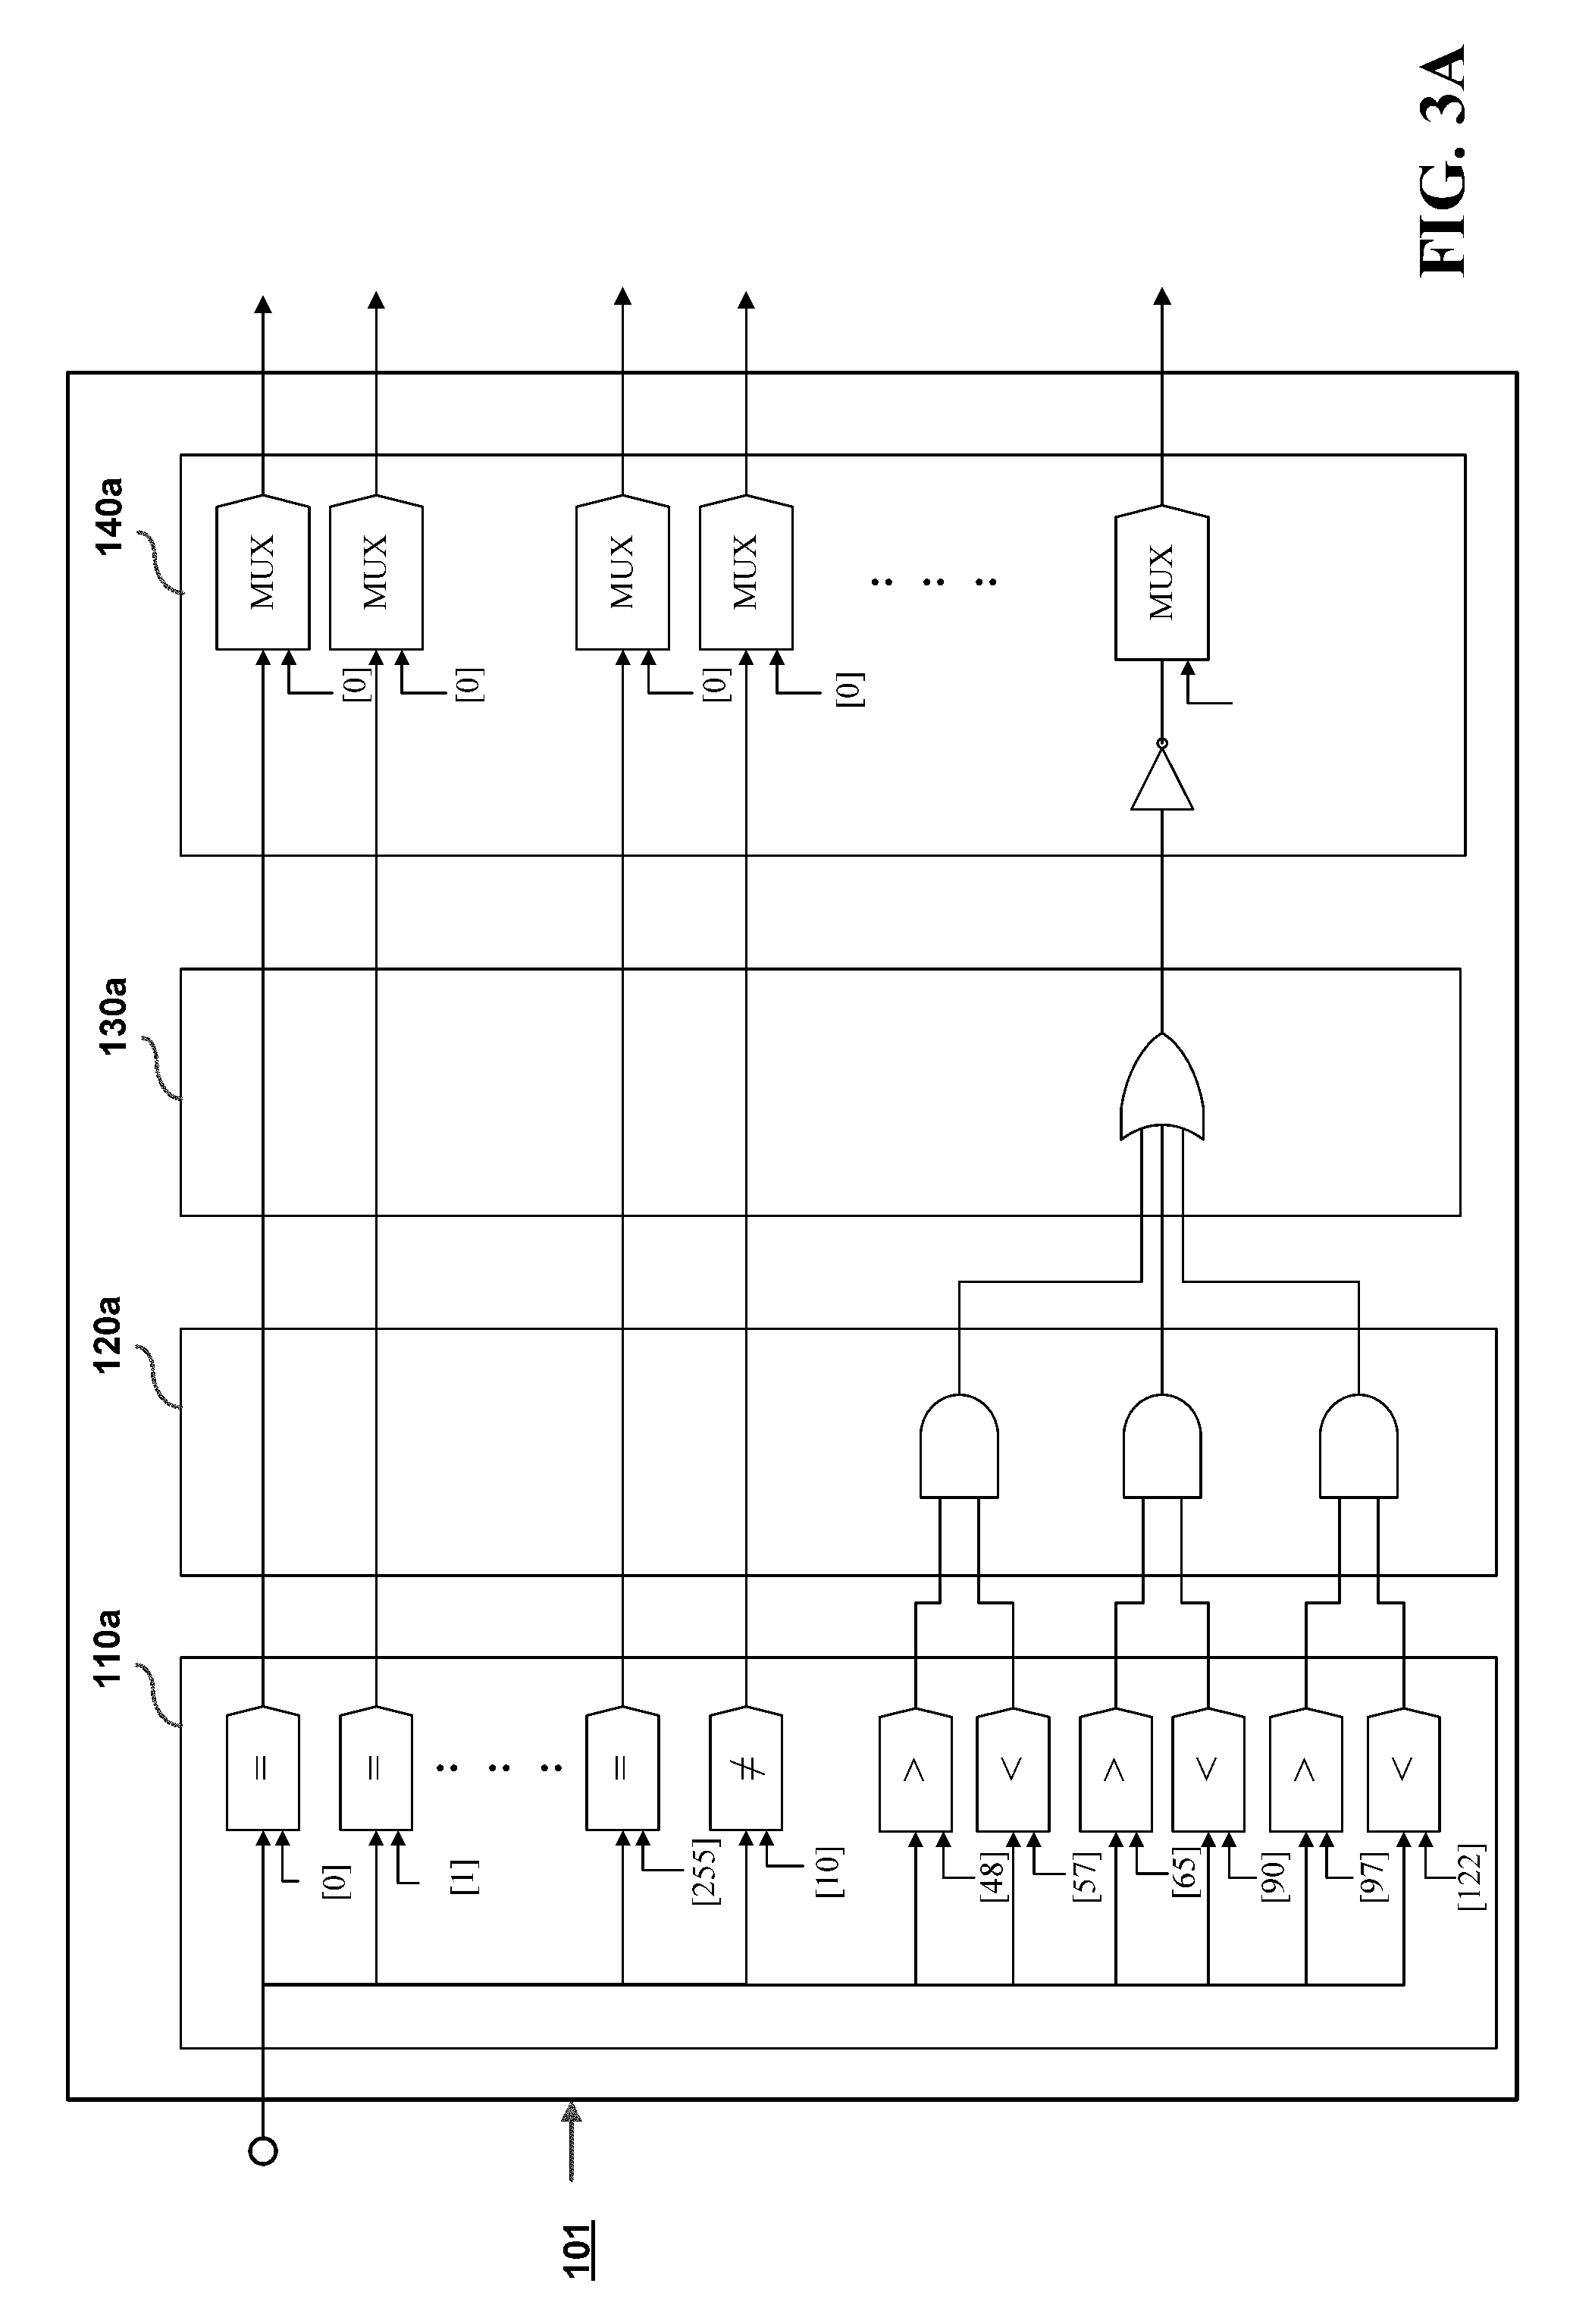 Regular expession pattern matching circuit based on a pipeline architecture